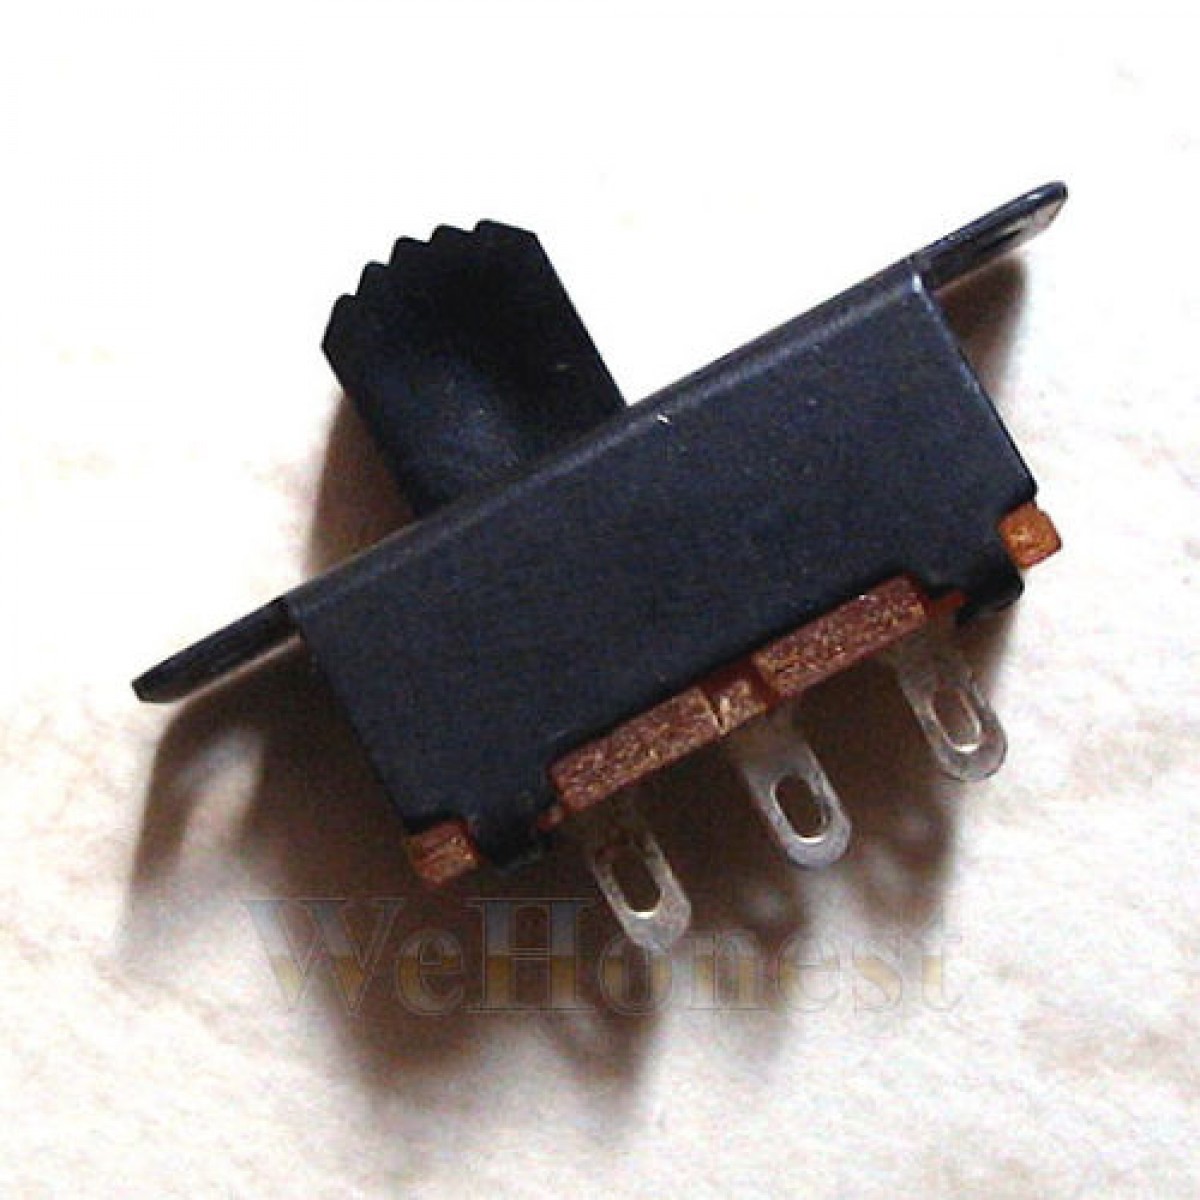 5 x Slide Switch 2P2T On-Off with screws, nuts etc.